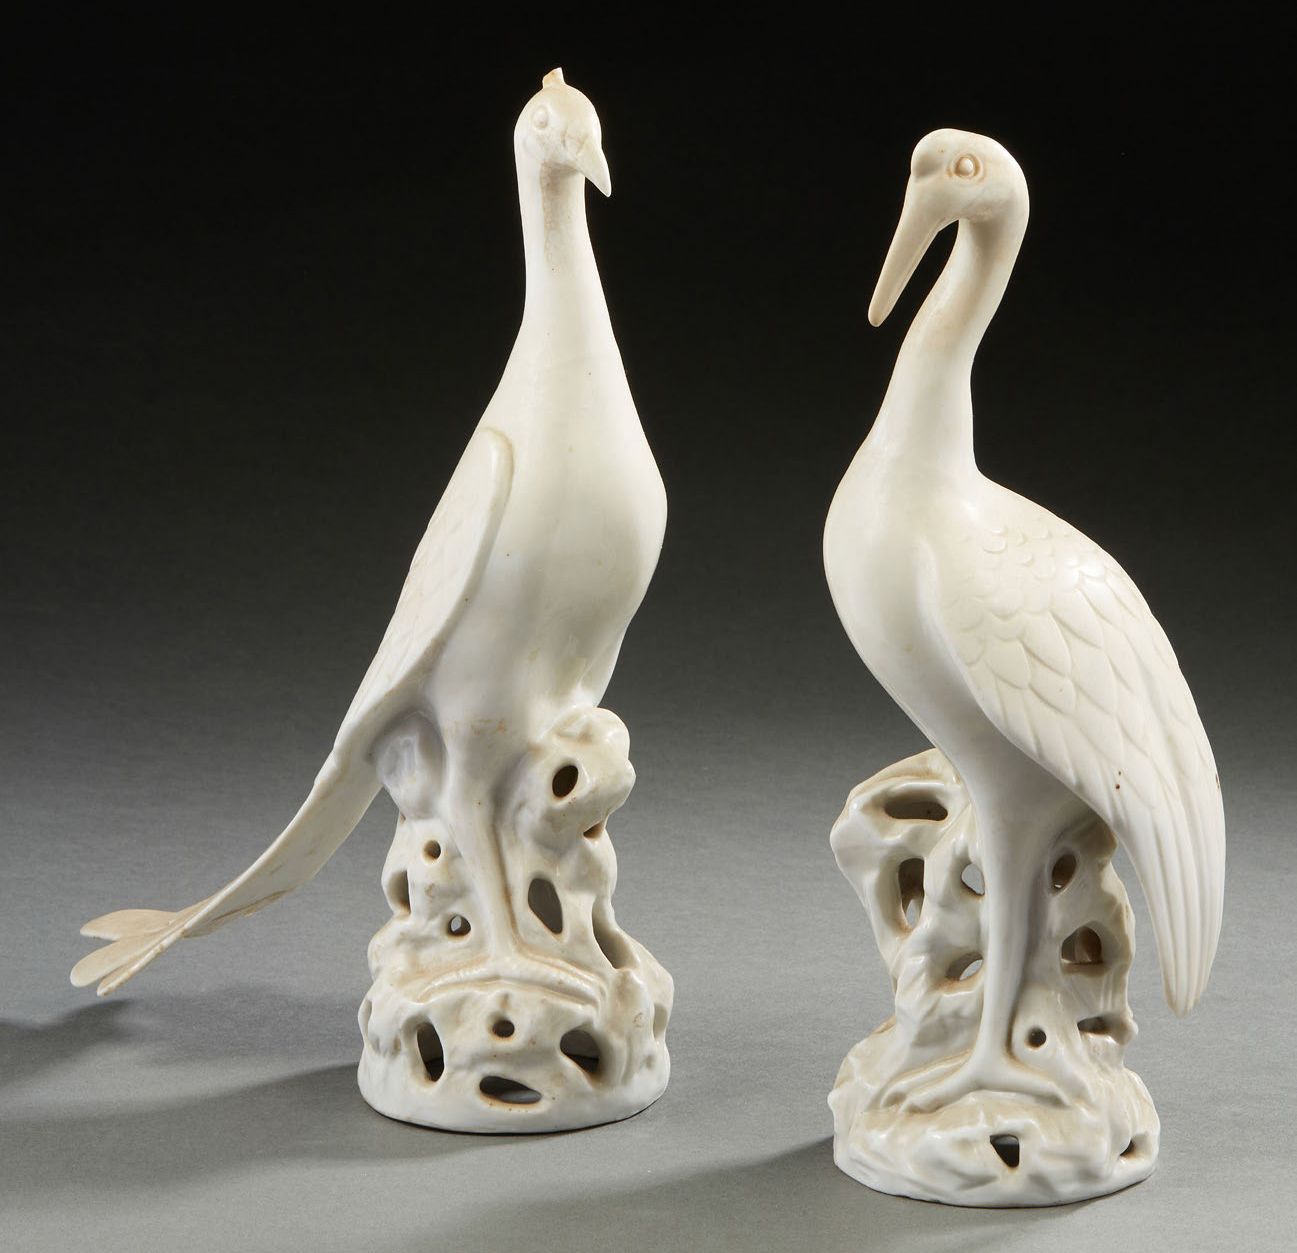 CHINE, XXe siècle Two birds in white porcelain of China representing a peacock a&hellip;